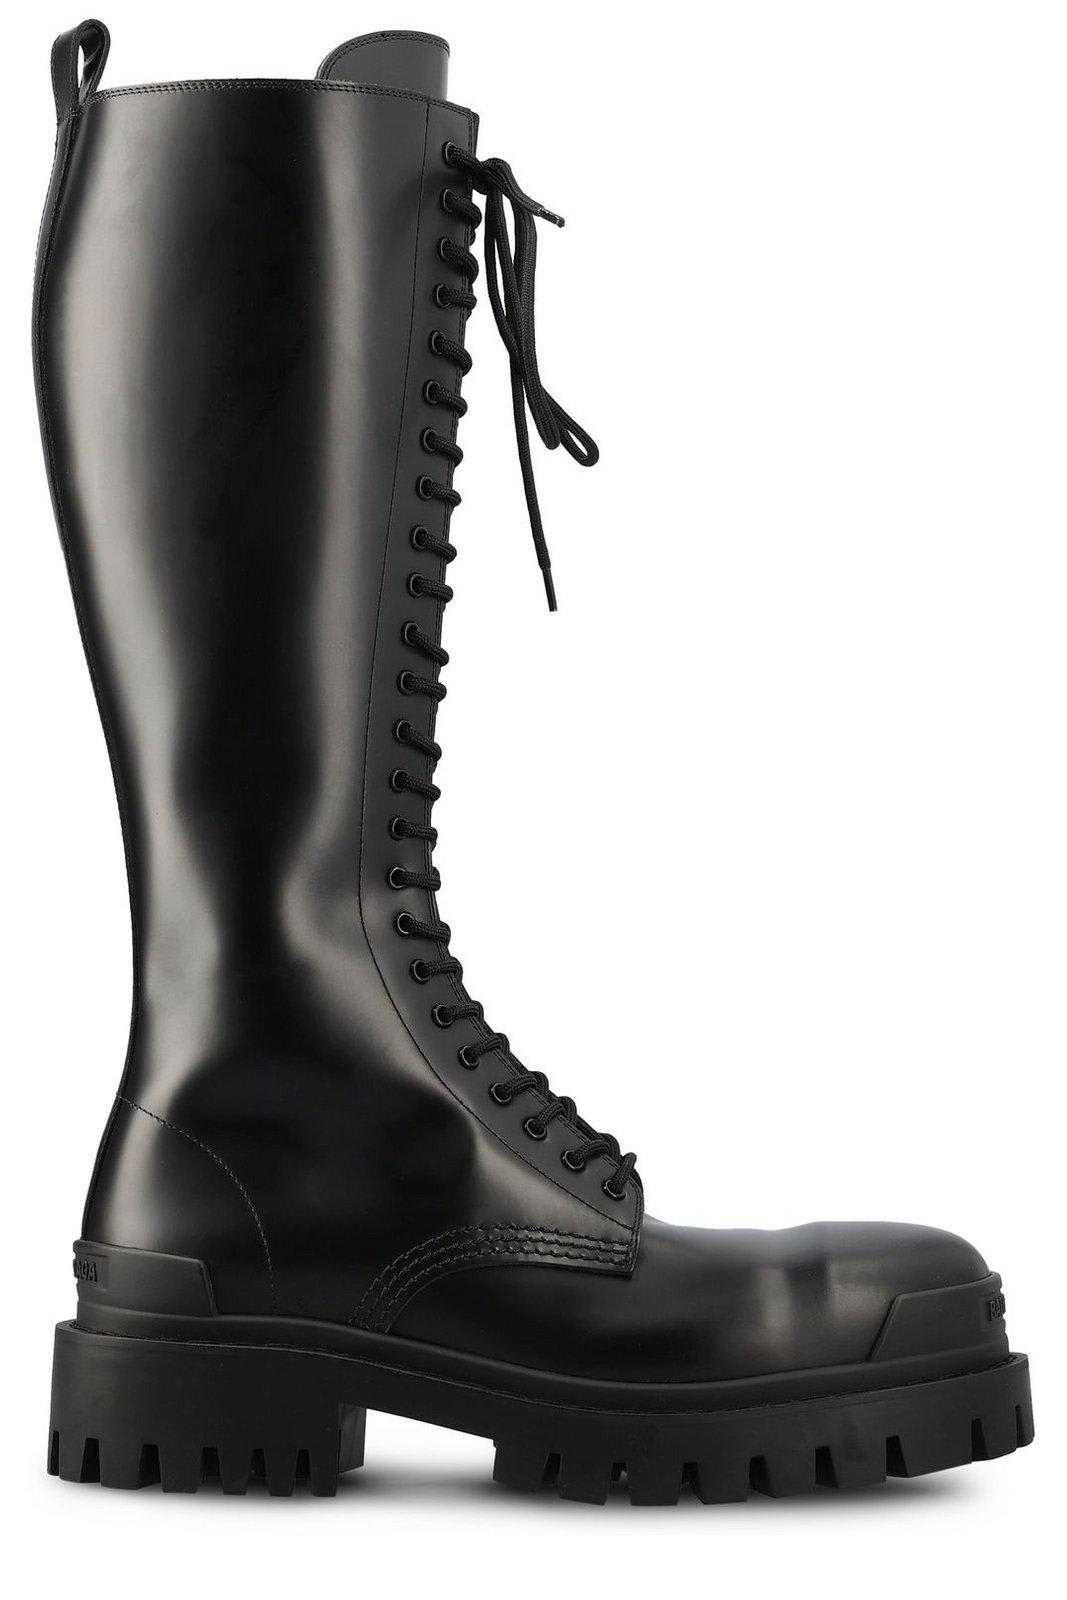 Strike Lace-up Boots